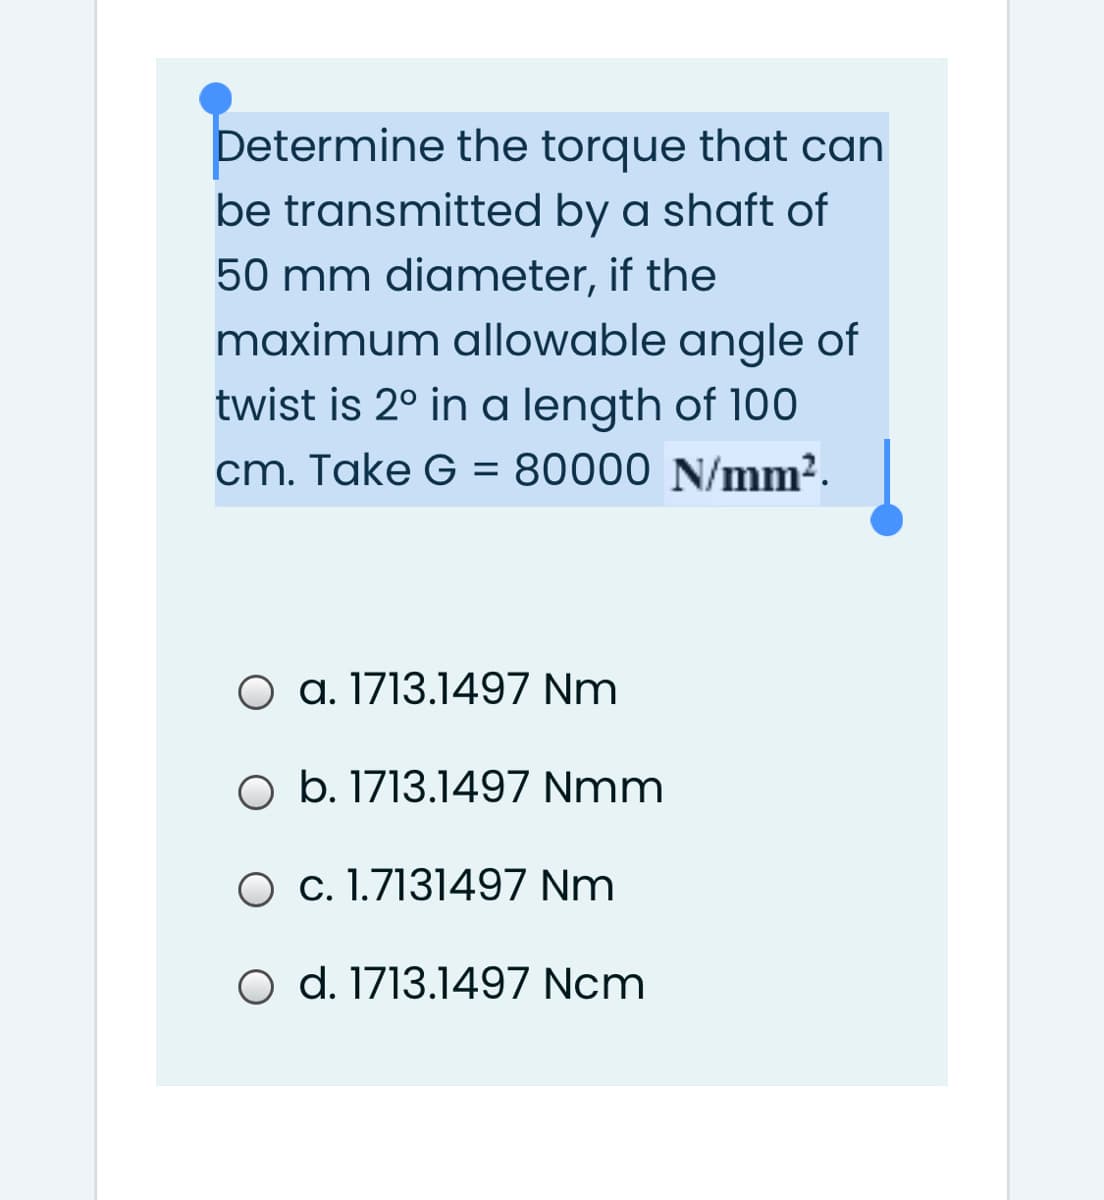 Determine the torque that can
be transmitted by a shaft of
50 mm diameter, if the
maximum allowable angle of
twist is 2° in a length of 100
cm. Take G = 80000 N/mm².
O a. 1713.1497 Nm
O b. 1713.1497 Nmm
O c. 1.7131497 Nm
O d. 1713.1497 Ncm
